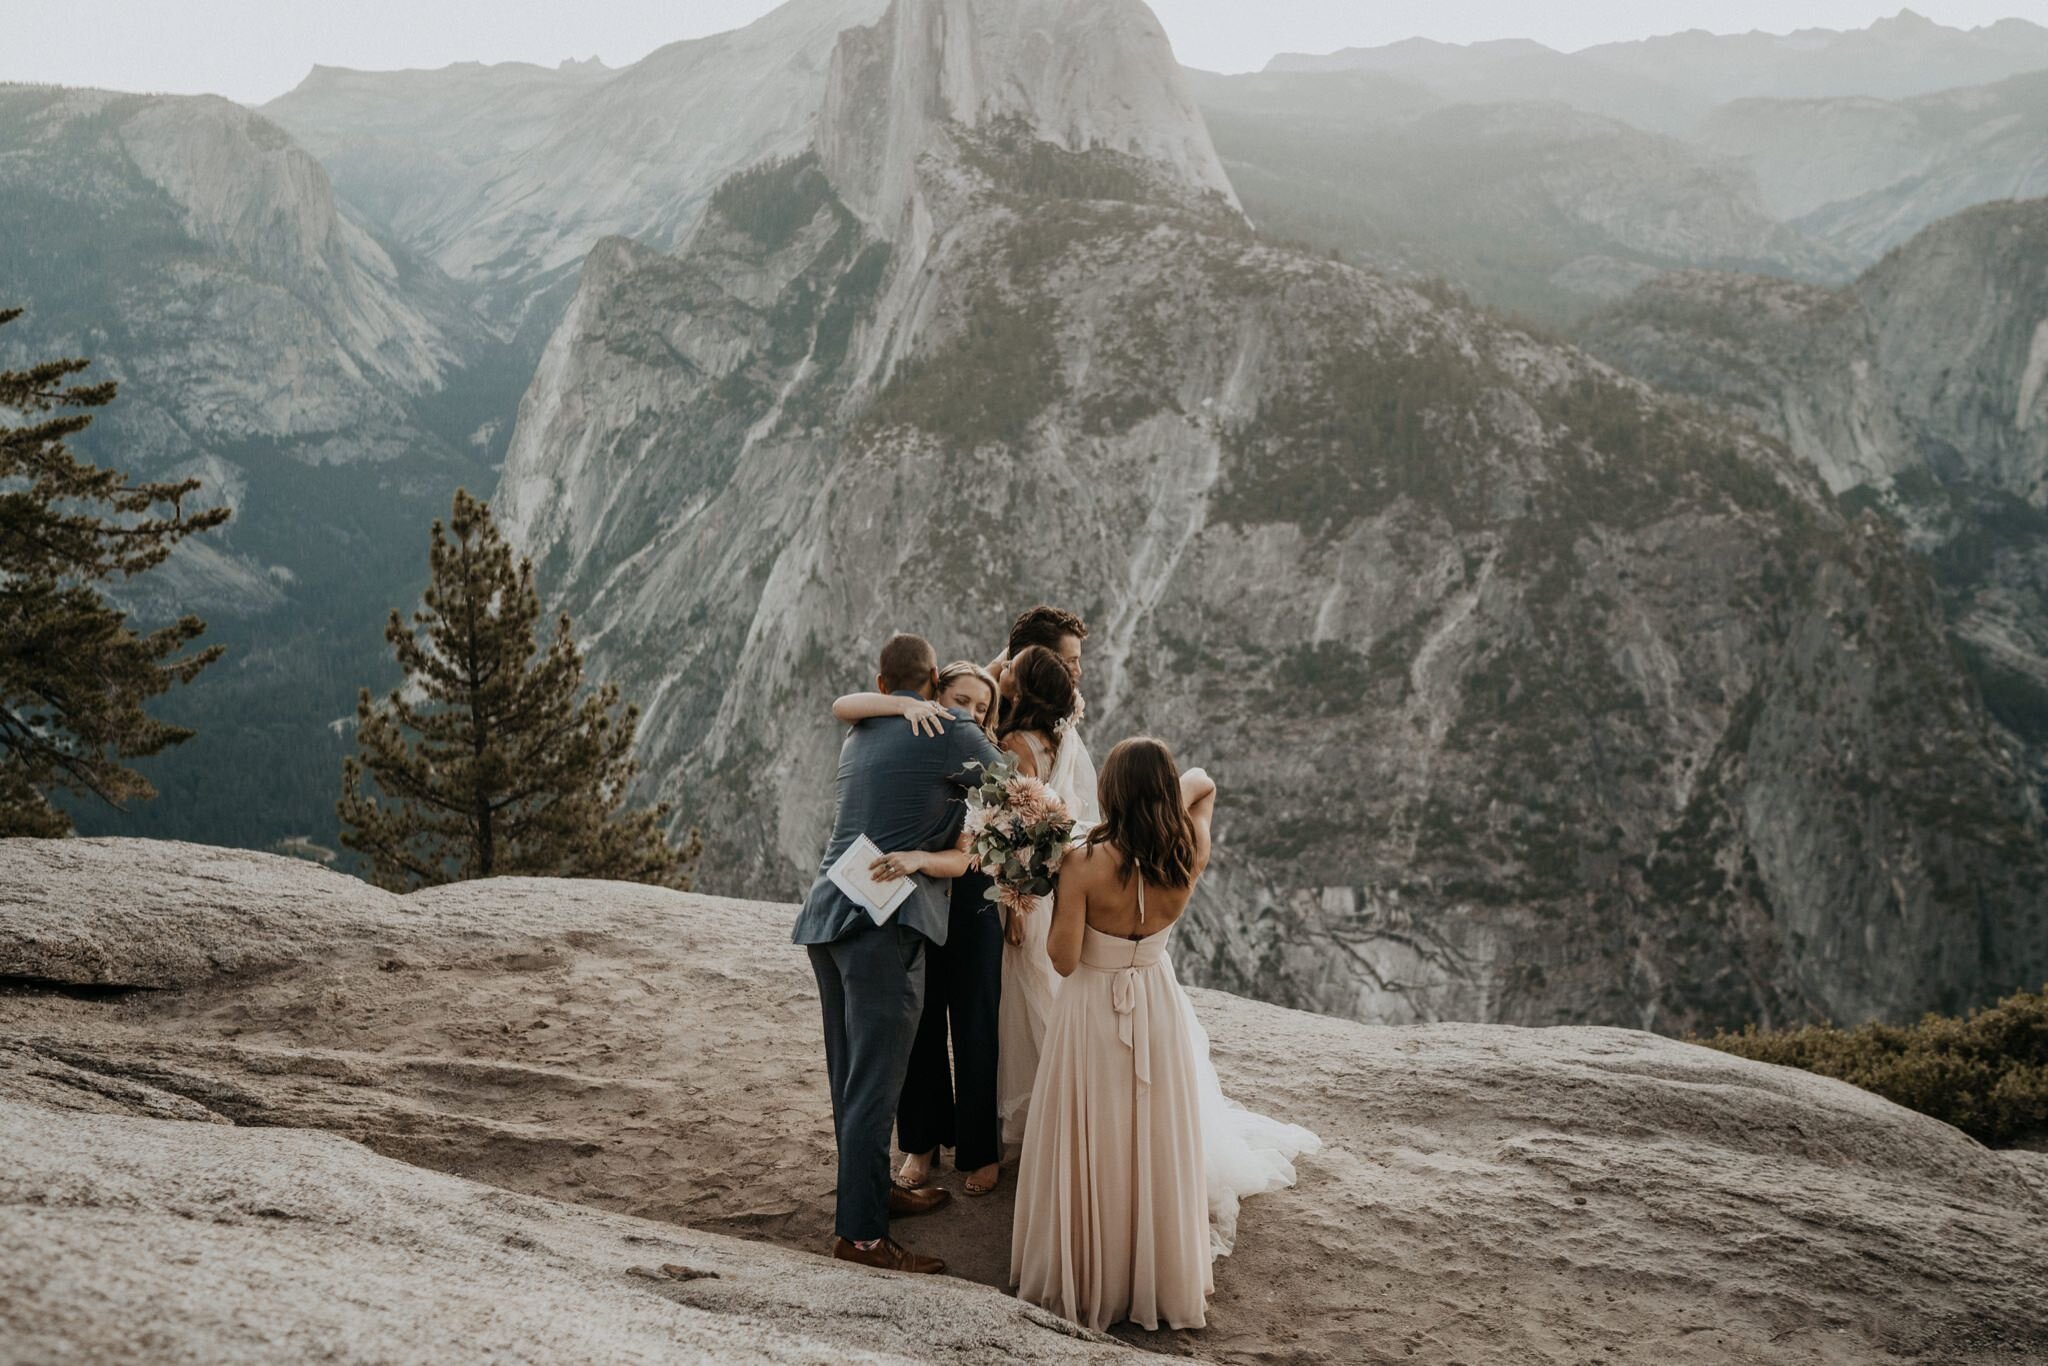 Yosemite National Park elopement and wedding photos at Glacier Point during sunrise with view of Half Dome